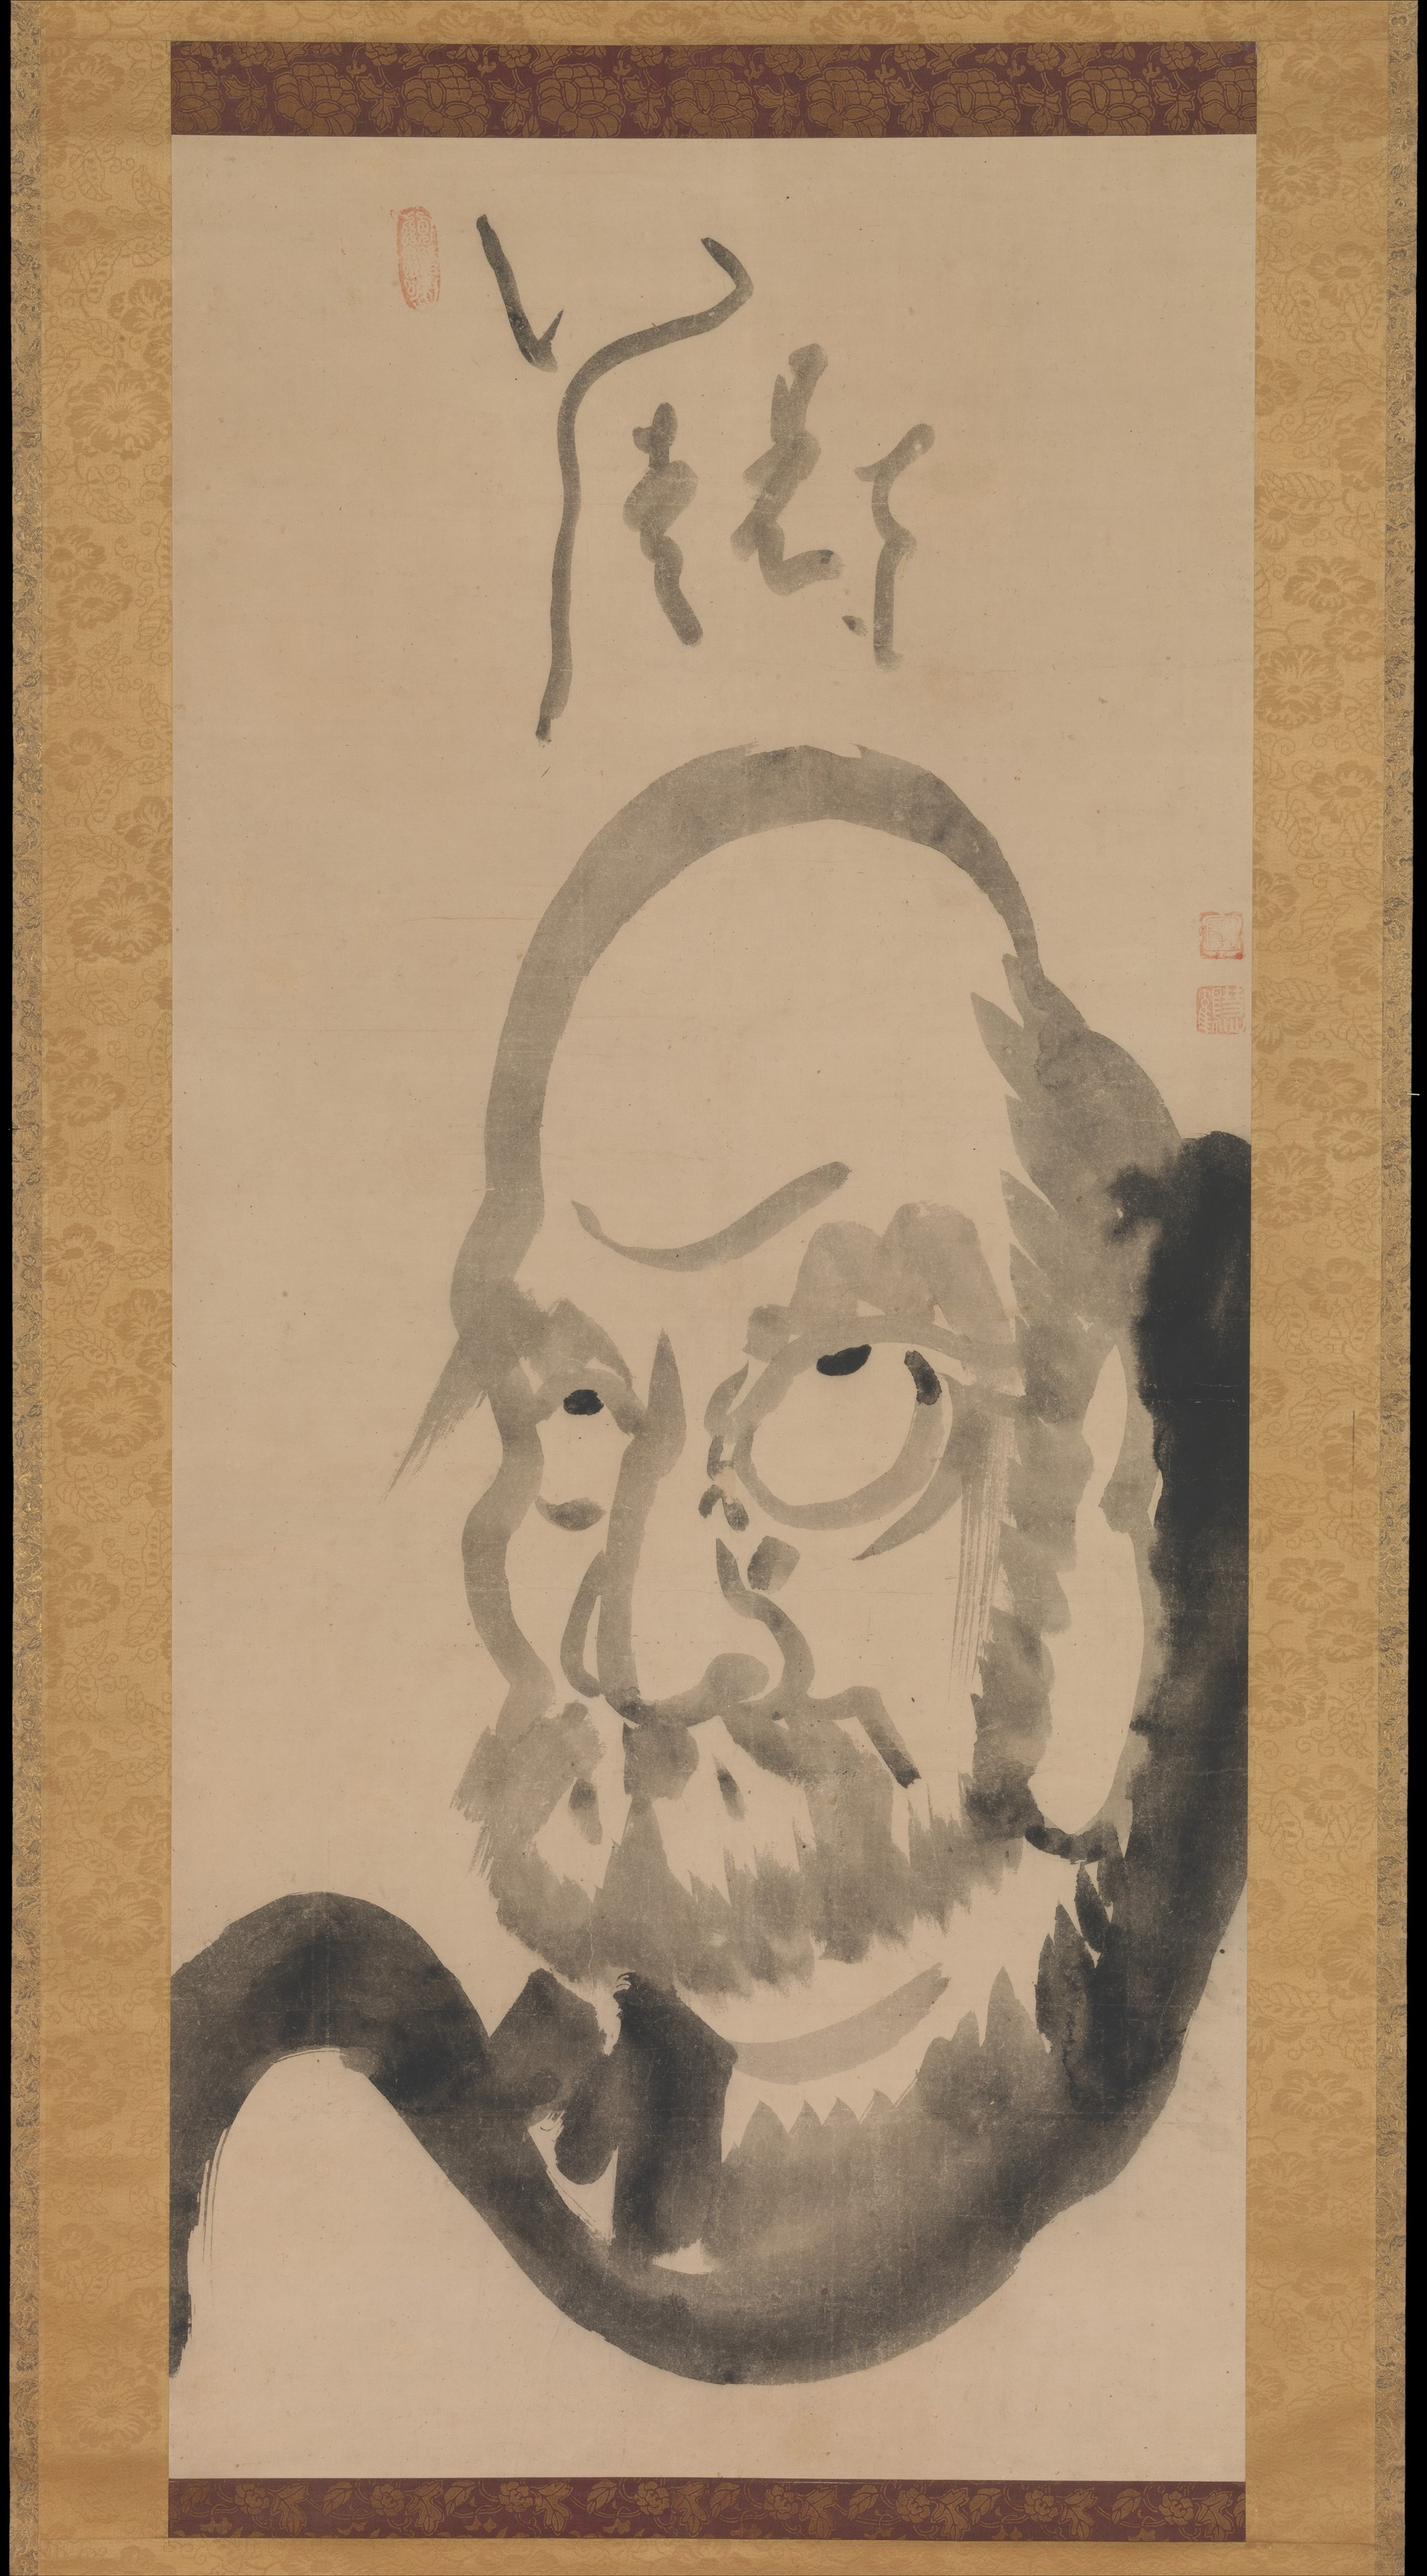 Hakuin Ekaku, Portrait of Bodhidharma, hanging scroll, ink on paper, mid-eighteenth century (Metropolitan Museum of Art, New York). Photo: Public Domain.Portrait of Daruma, Japan, Edo period (1615–1868) Hanging scroll; ink on paper; Image: 45 7/8 x 21 1/4 in. (116.5 x 54 cm) The Metropolitan Museum of Art, New York, Gift of Florence and Herbert Irving, 2015 (2015.500.9.3) http://www.metmuseum.org/Collections/search-the-collections/78145